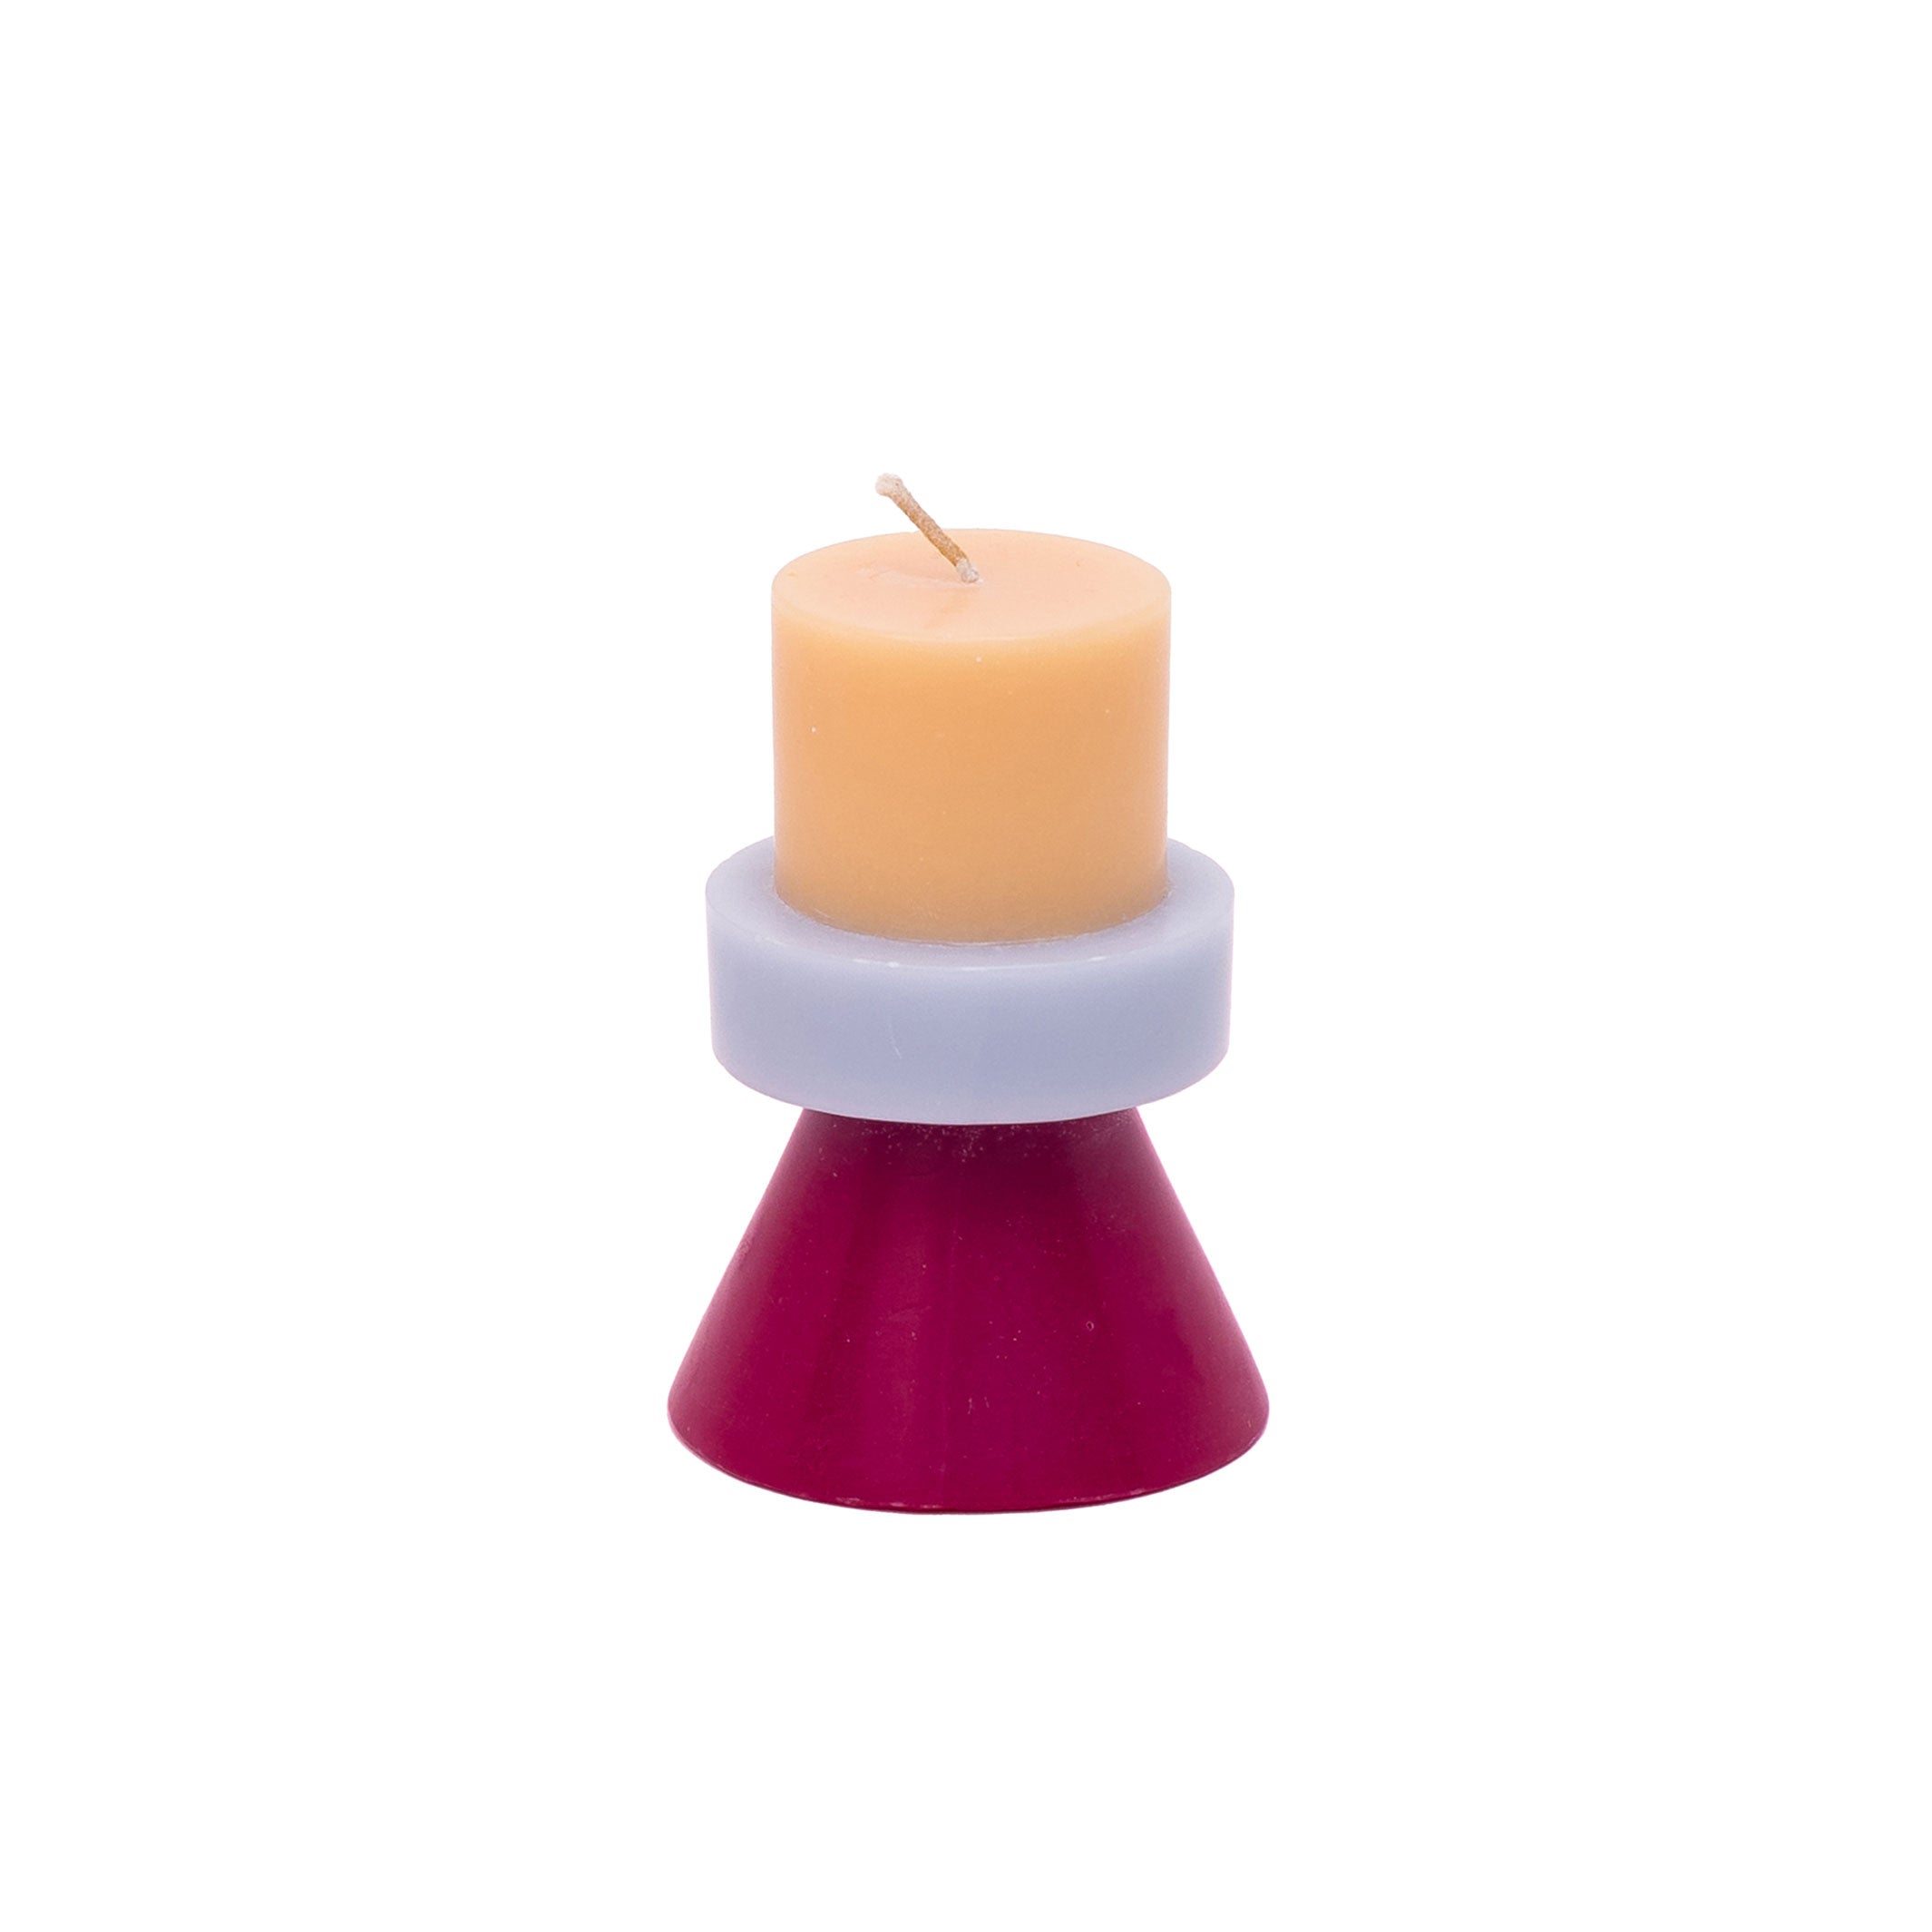 STACK CANDLE MINI | KERZE in Farben peach-lilac-ruby | 20 Std. Brenndauer | YOD AND CO